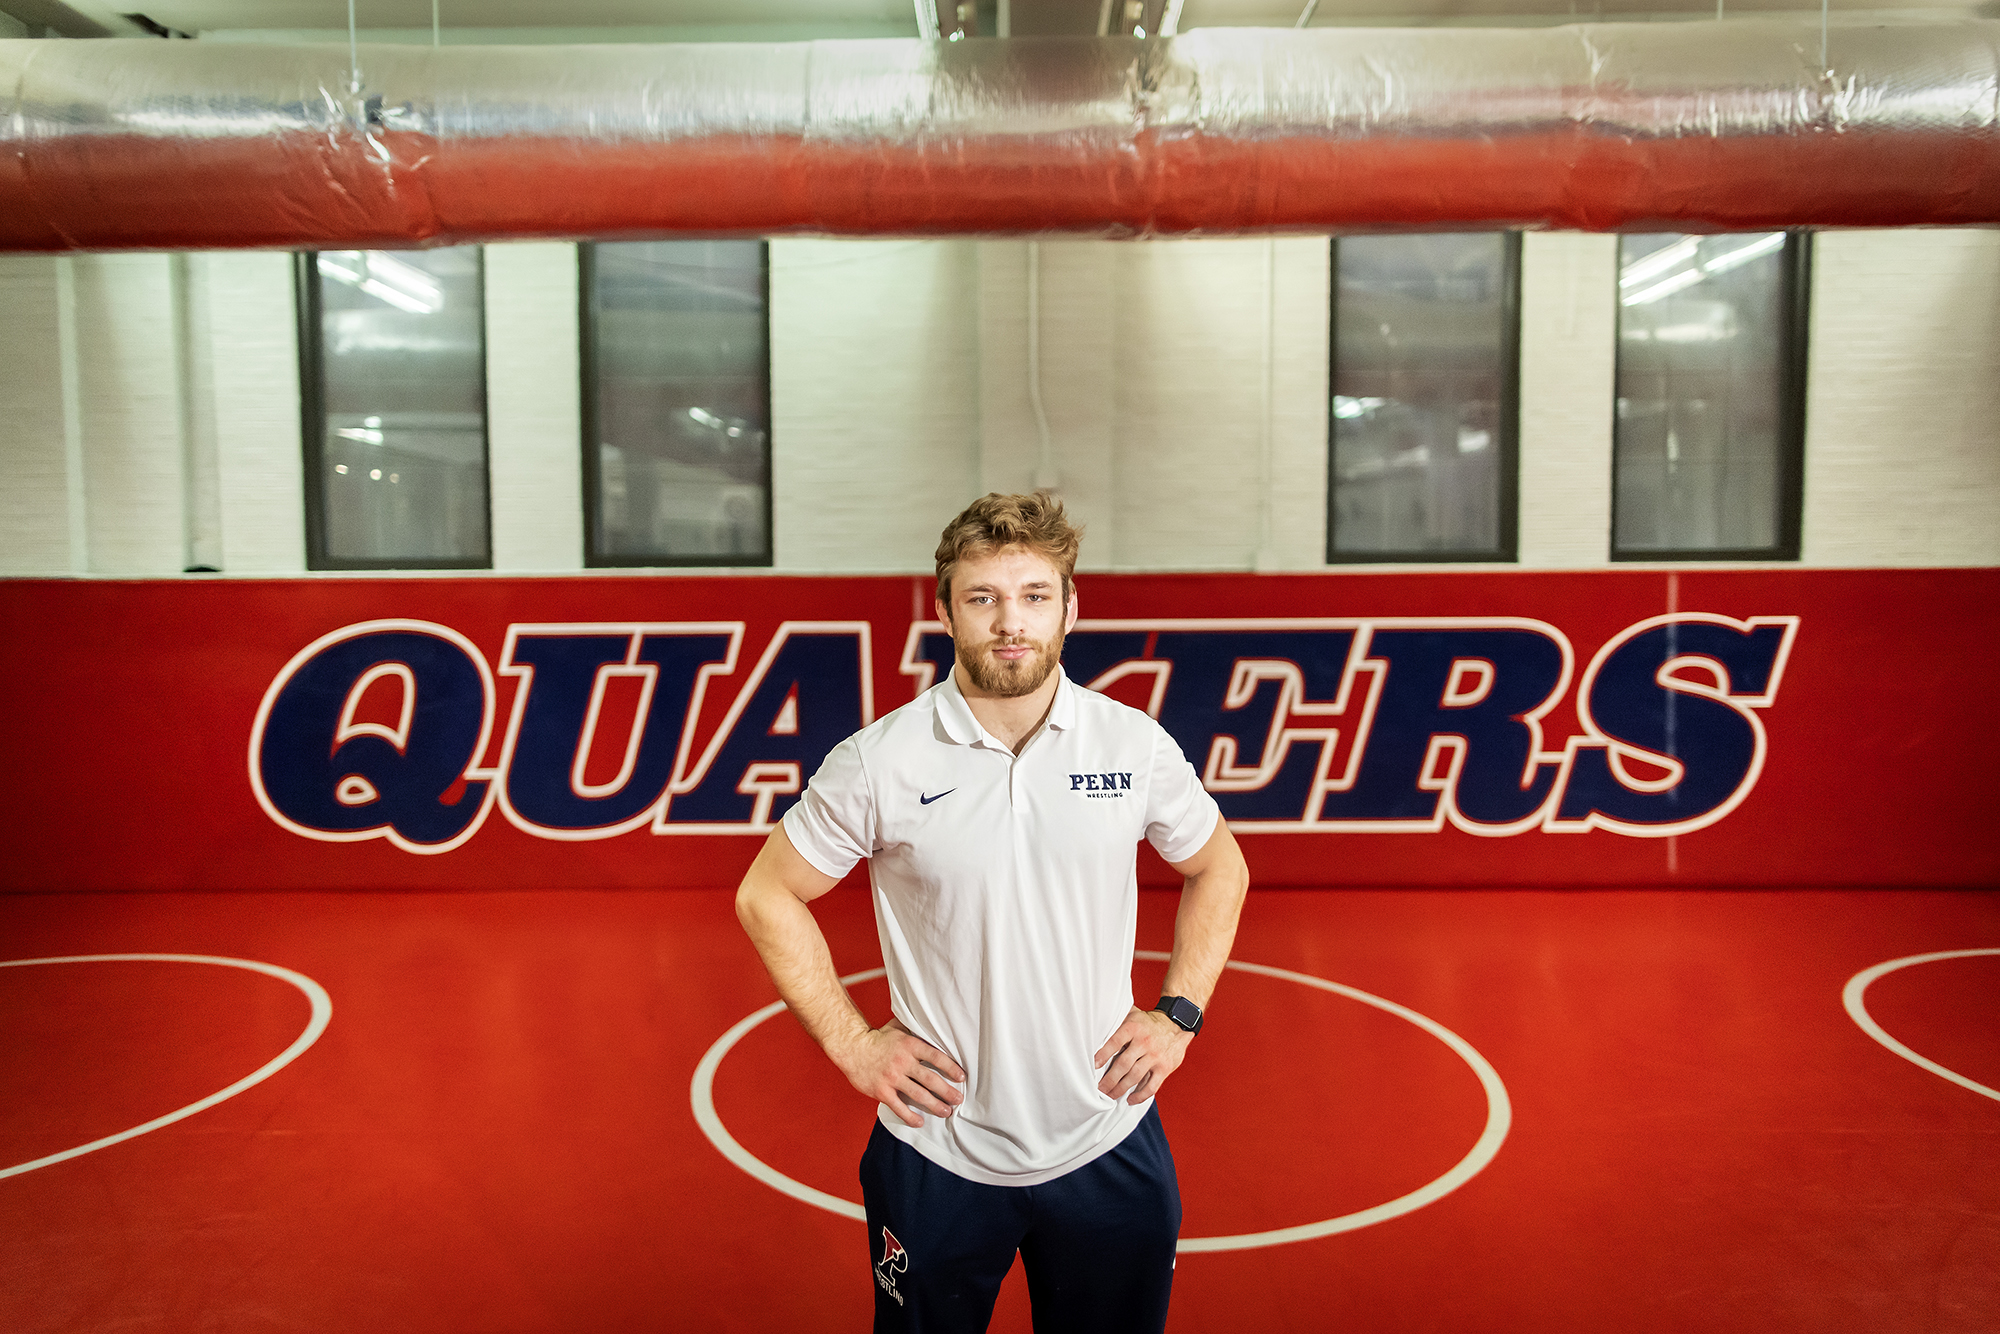 Wrestling Adam Thomson stands in the wrestling room at Penn, hands on hips, with a sign reading Quakers behind him.